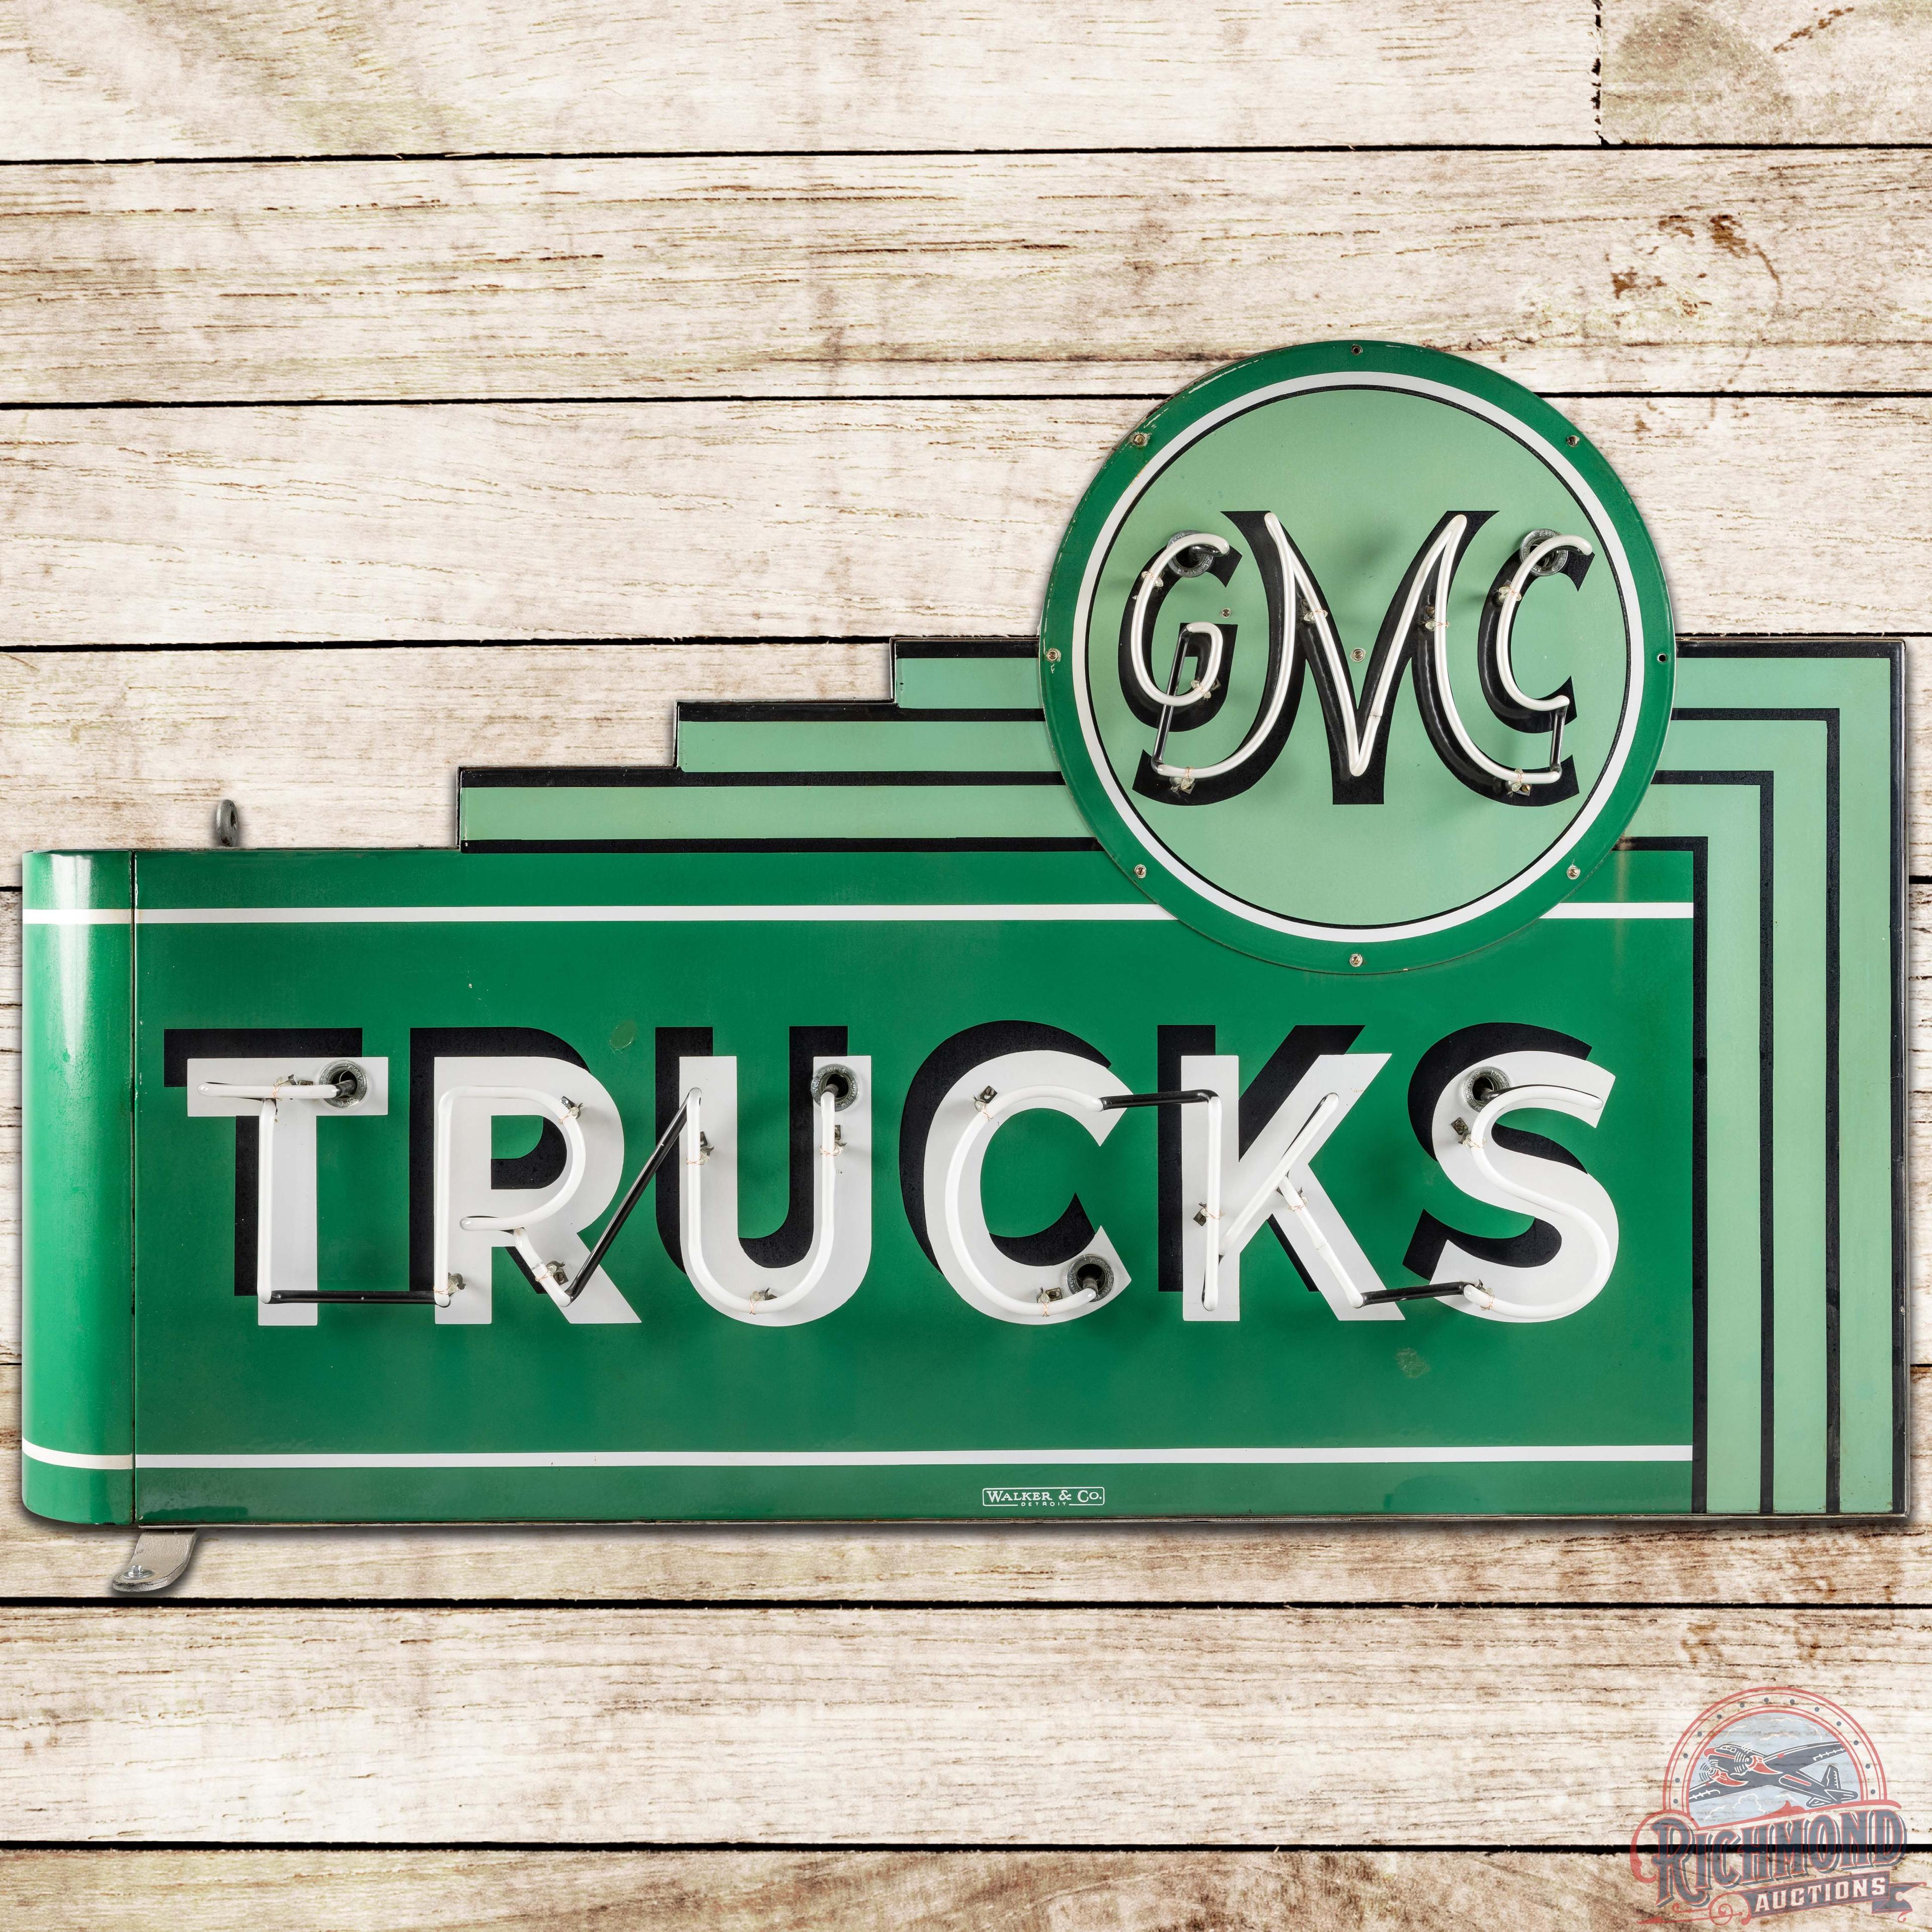 Rare GMC Trucks DS Porcelain Neon Sign w/ Drop Shade Lettering